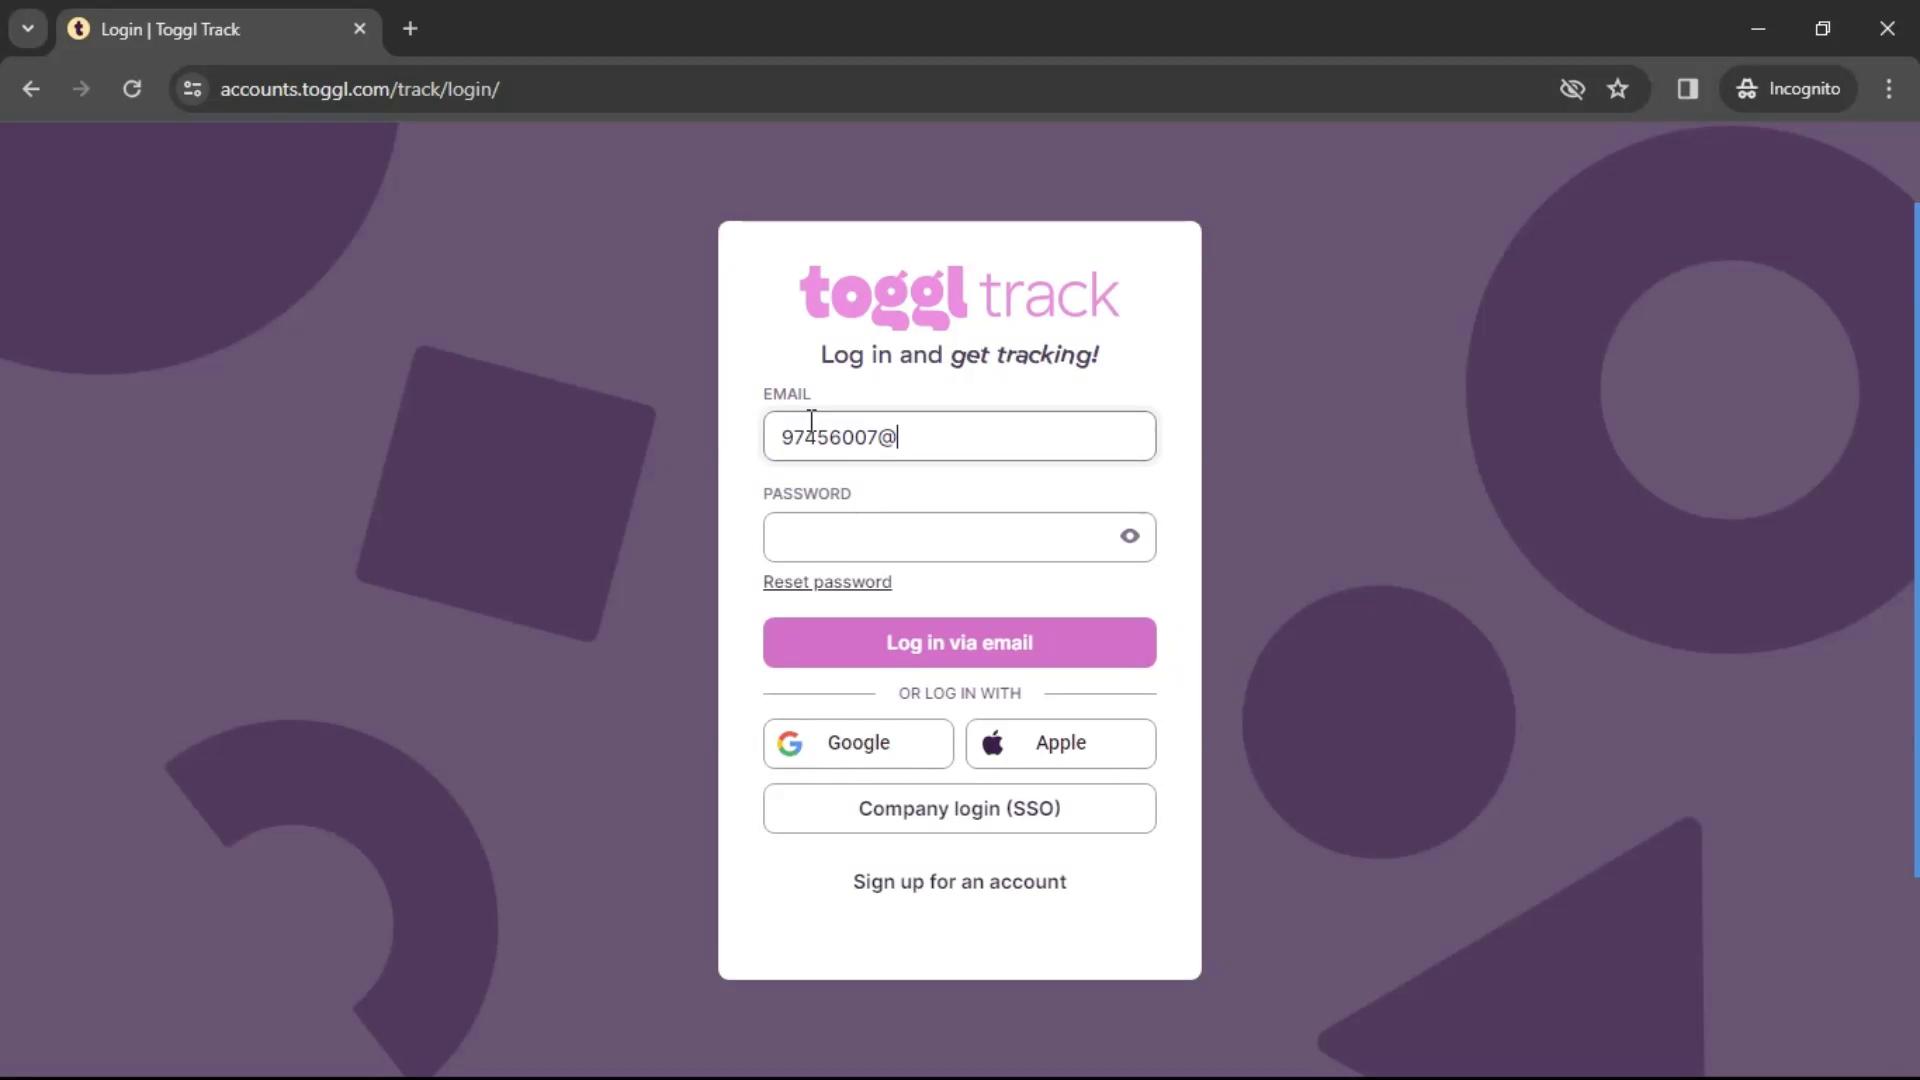 Resetting password on Toggl Track video screenshot